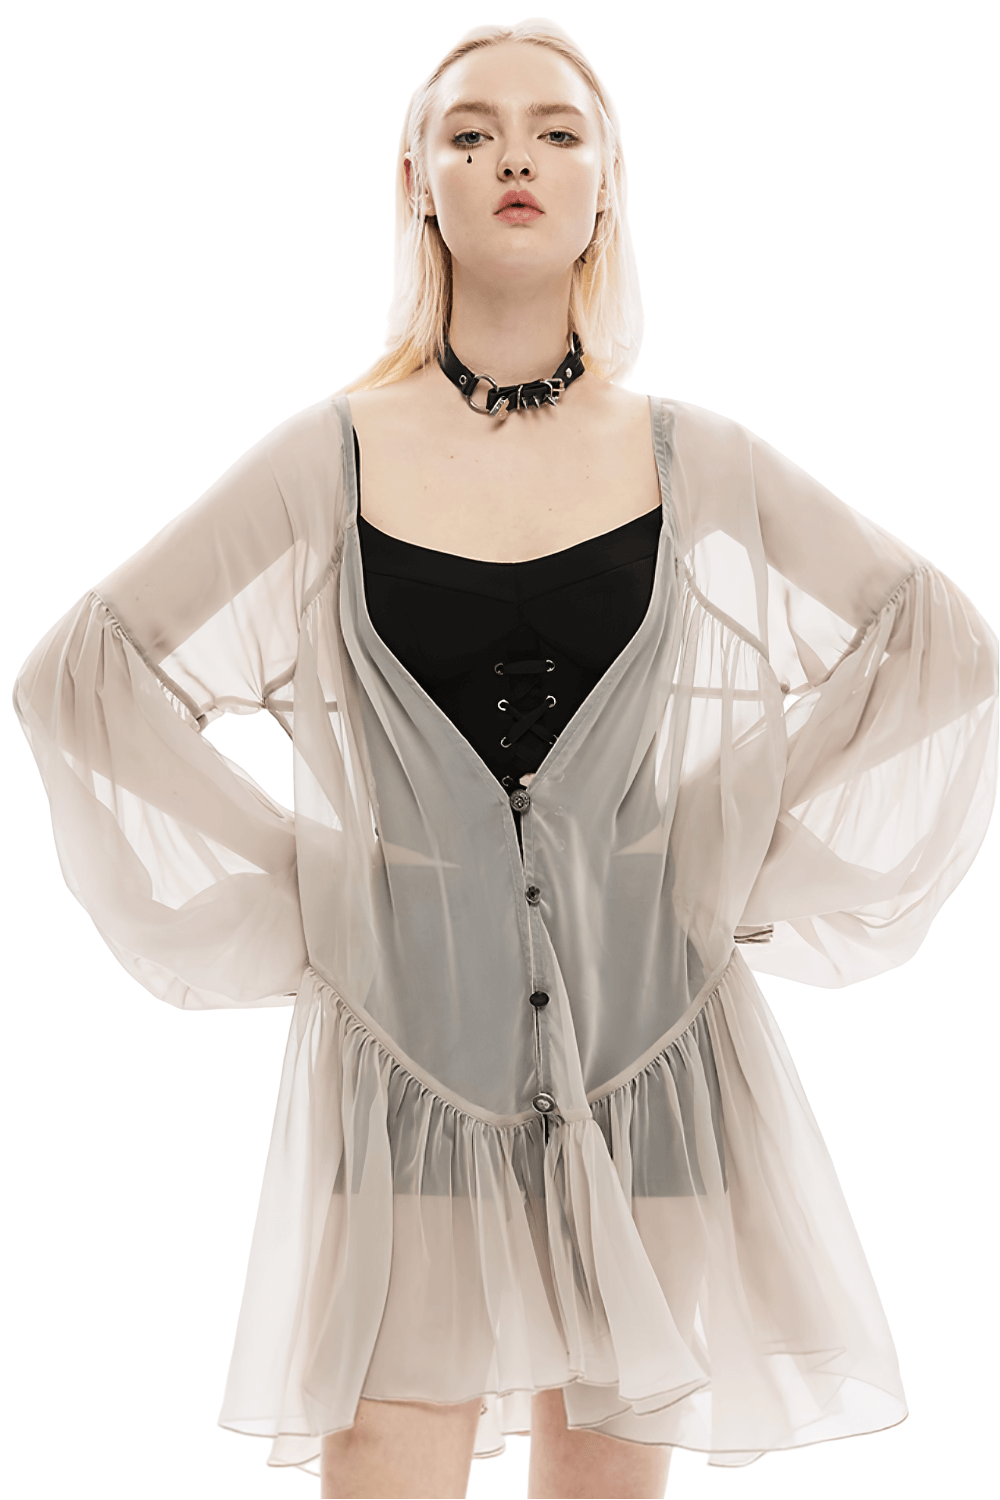 Chic Beige Chiffon Blouse with Ruffled Sleeves